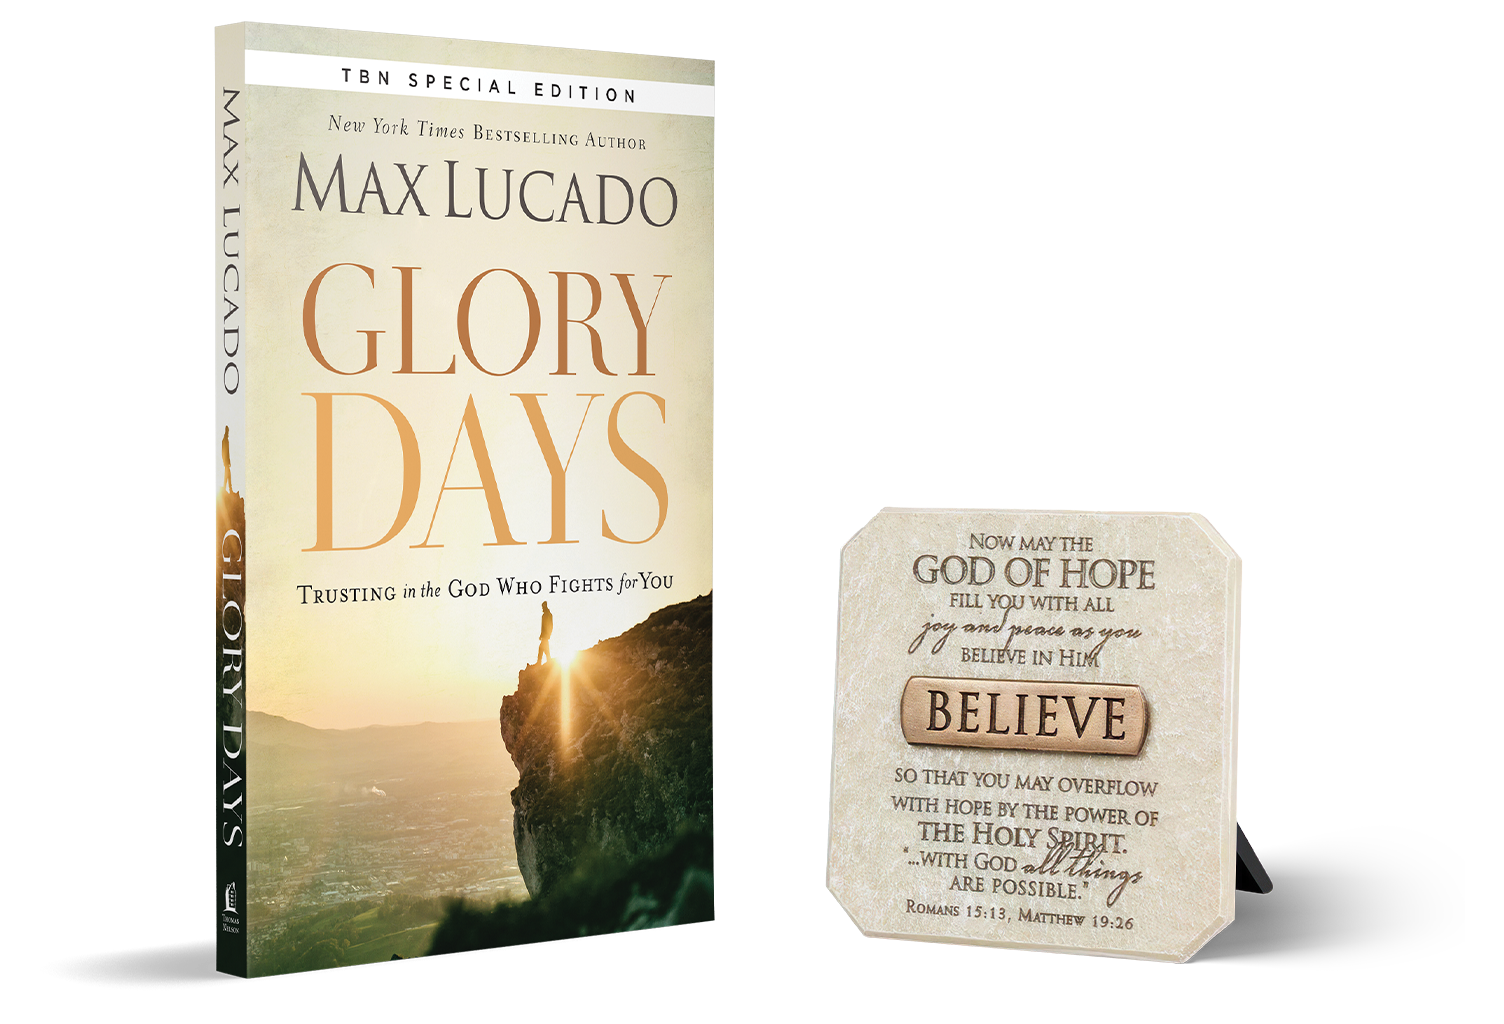 Receive Glory Days: Trusting in the God Who Fights for You by Max Lucado and Believe Plaque by TBN